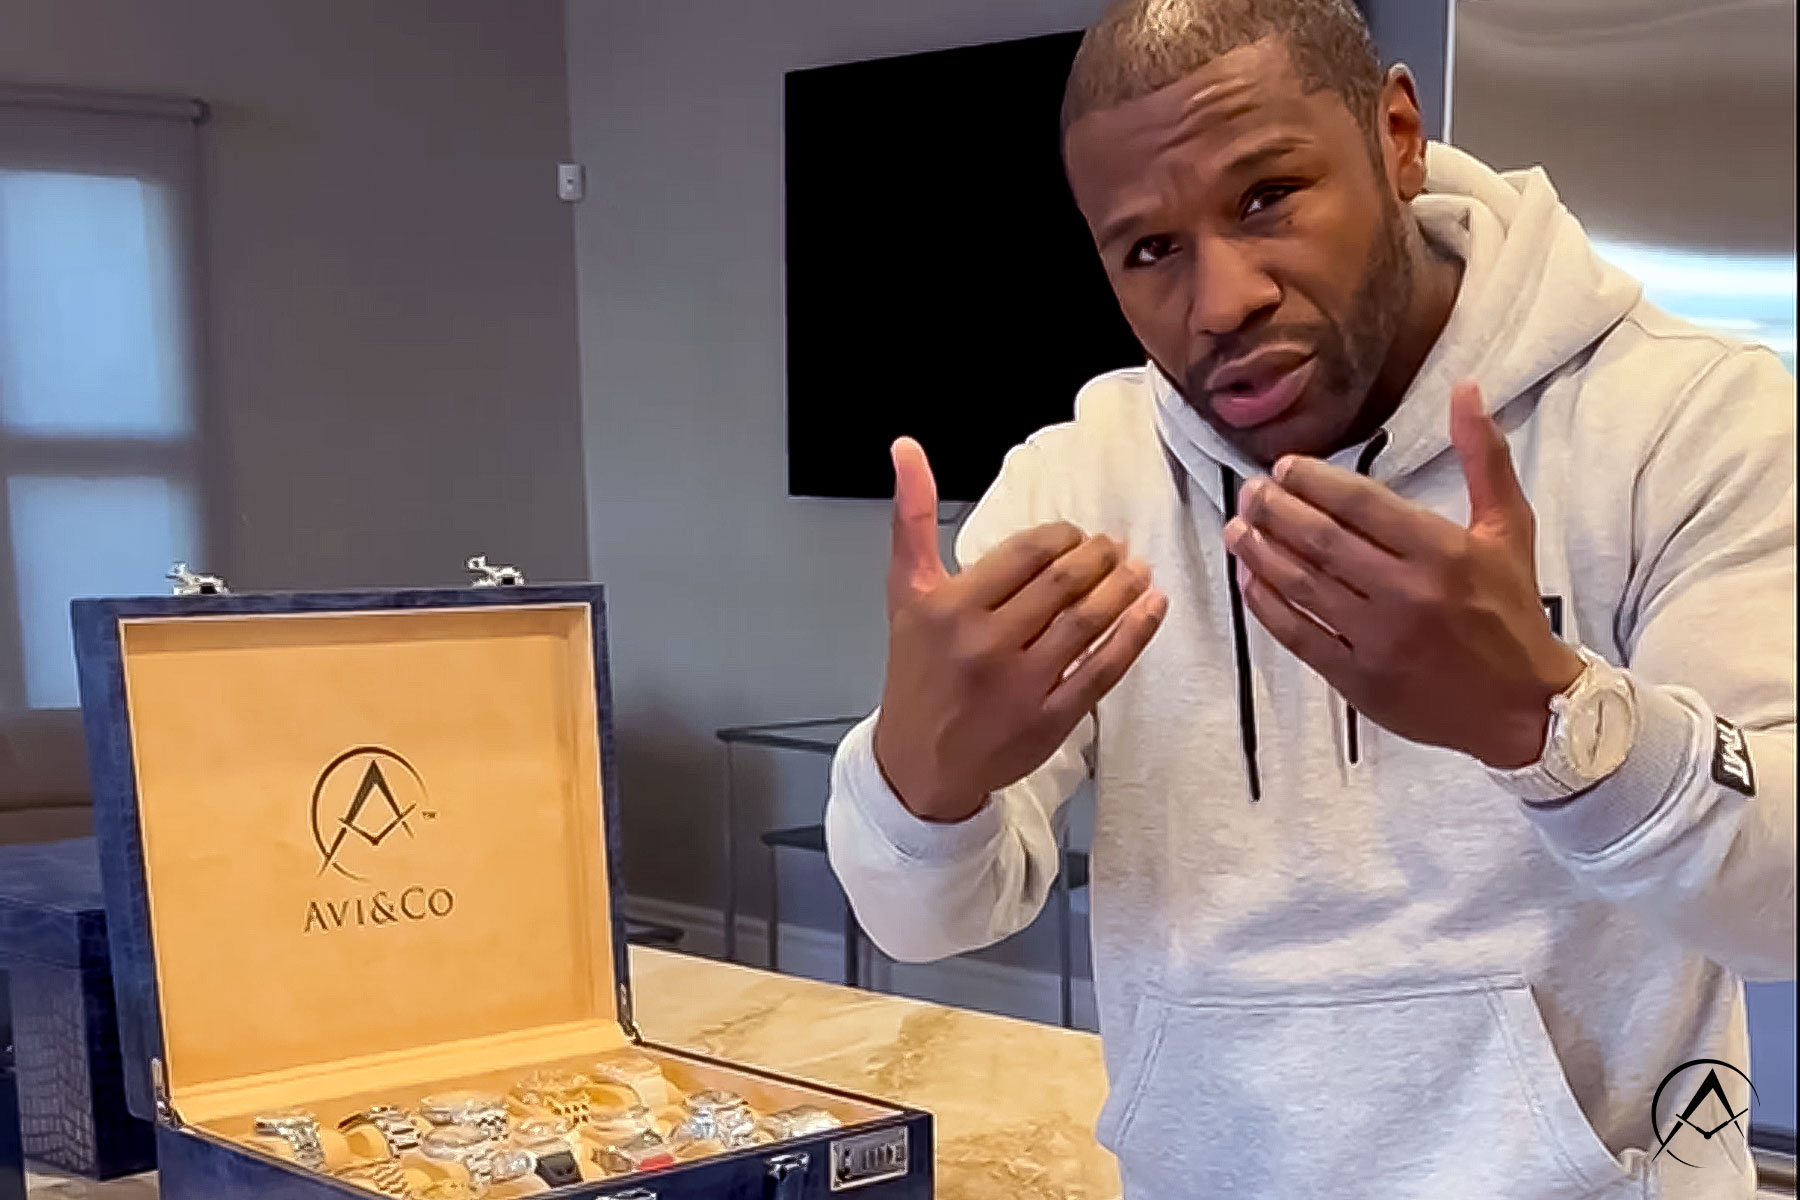 Richard Mille and Diamonds and Avi, Oh My: Floyd Mayweather's